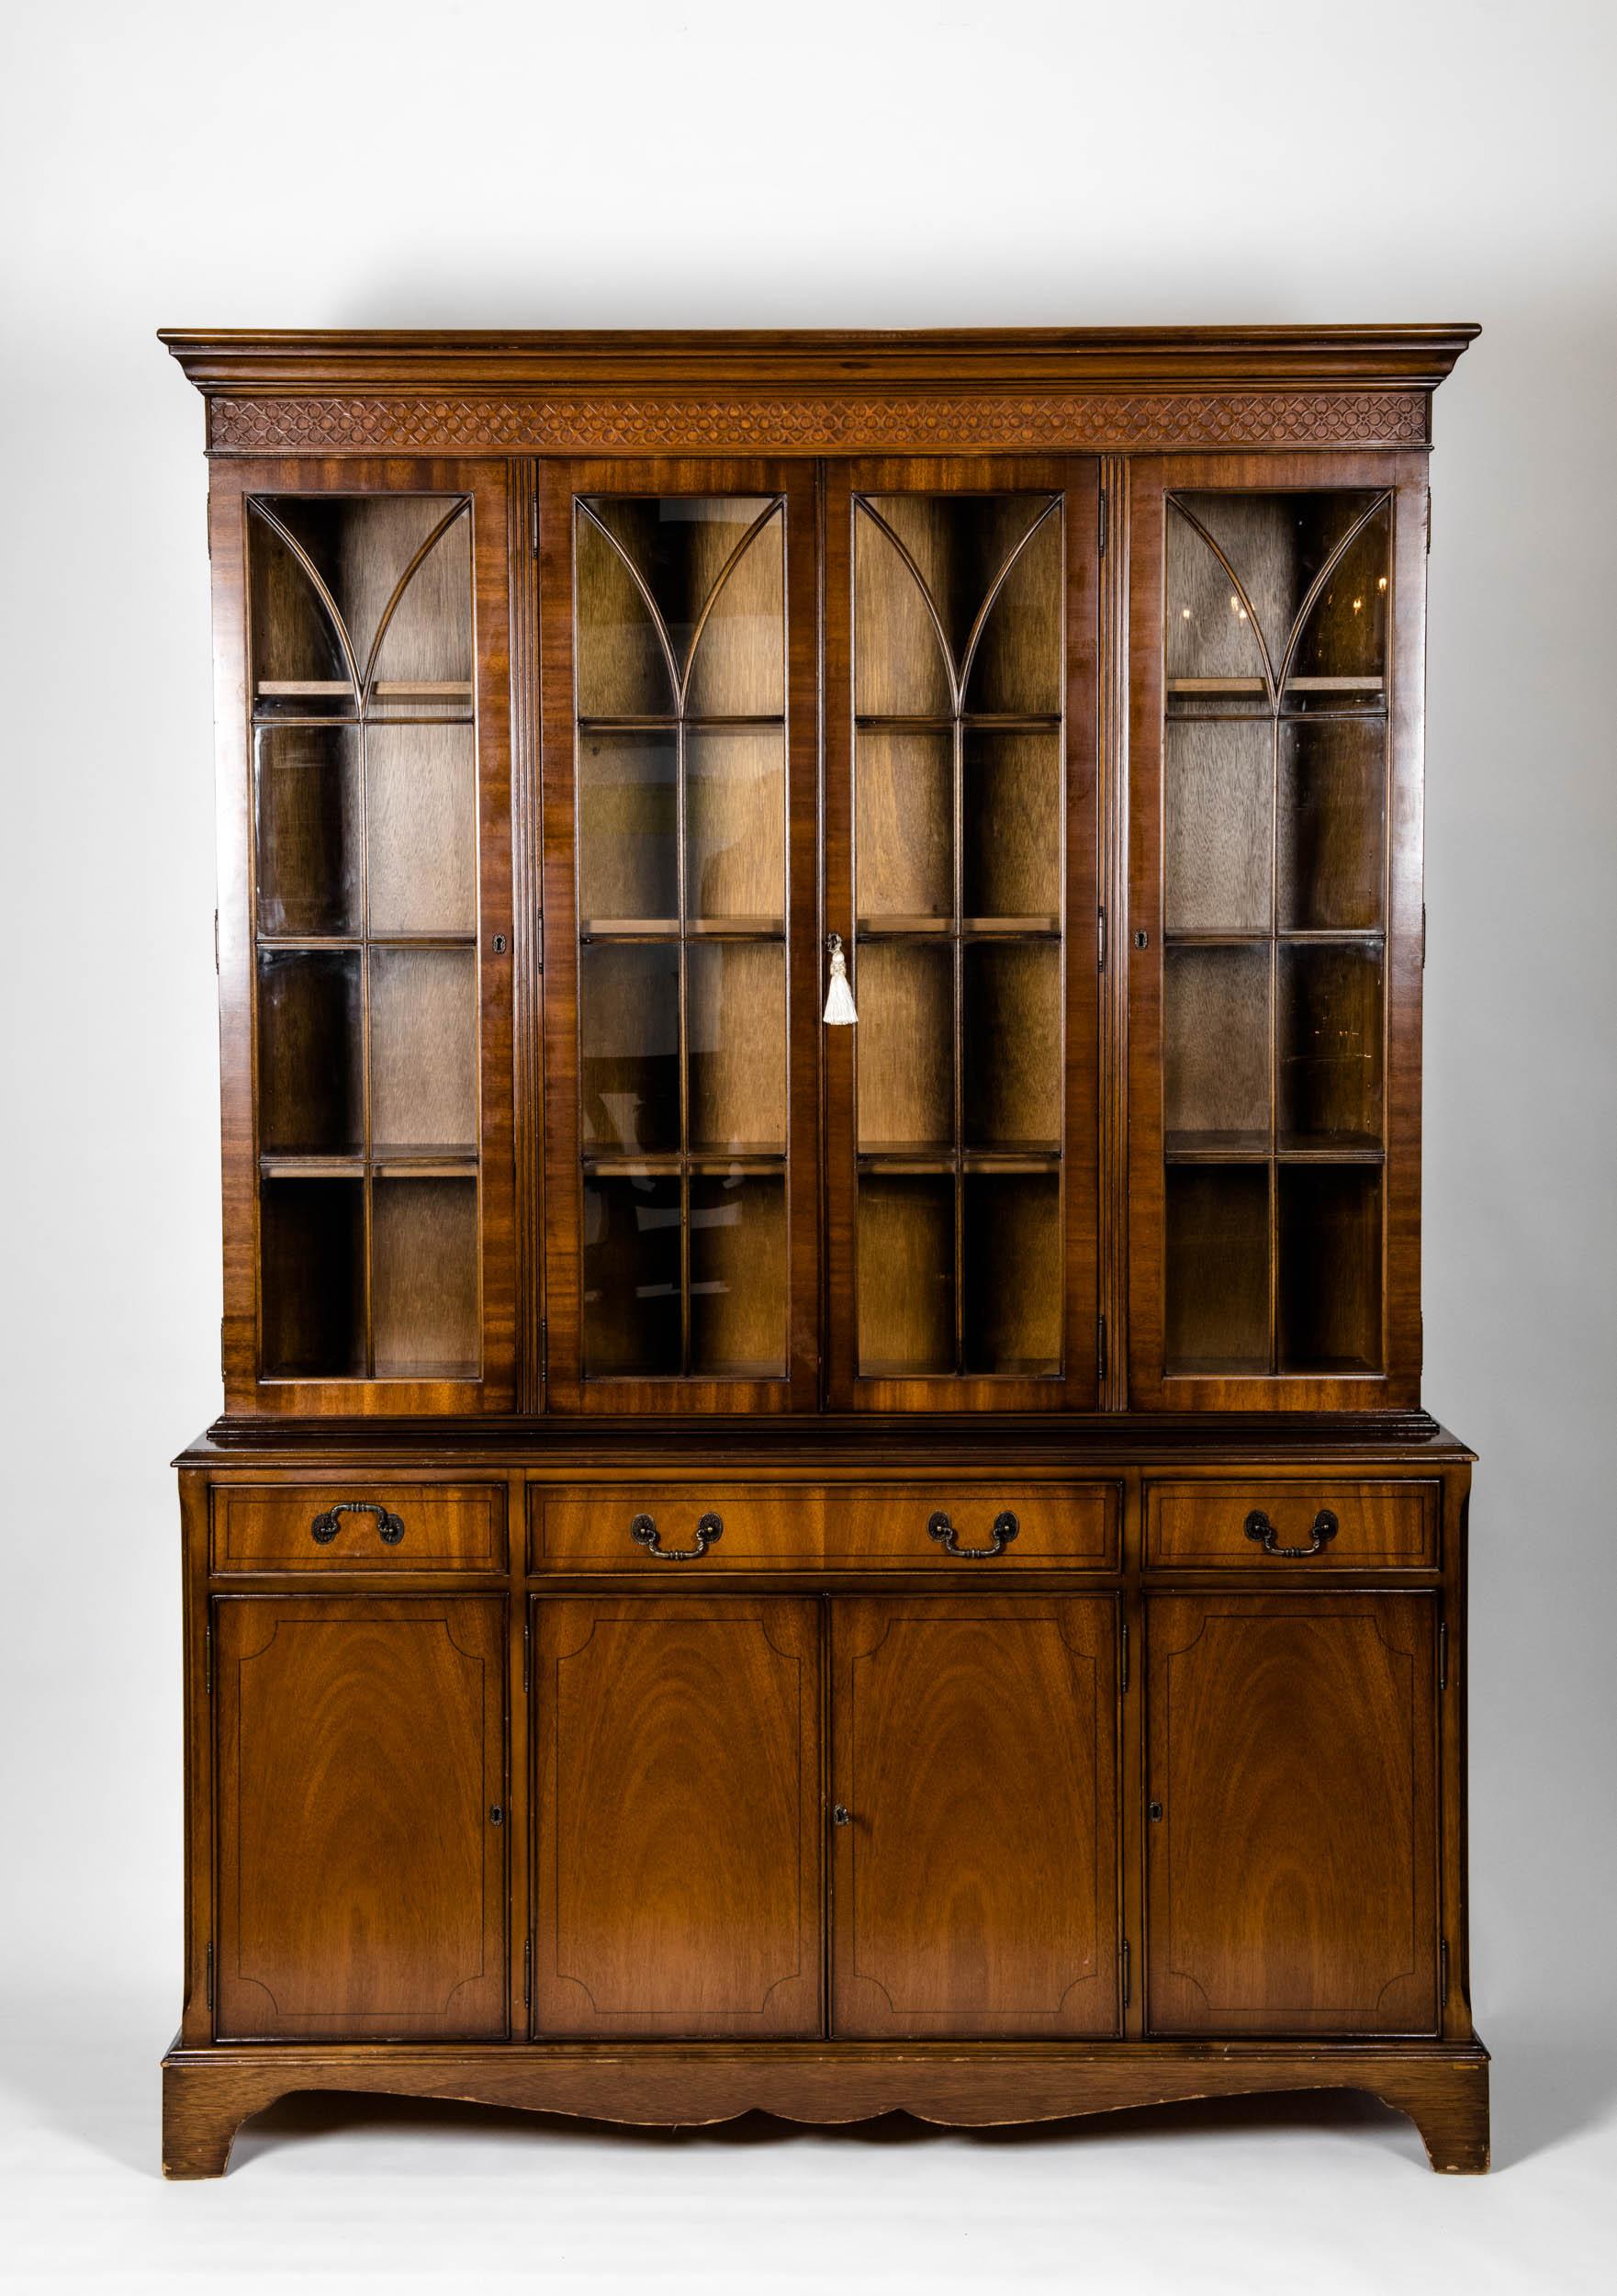 Mid-19th century English mahogany wood china cabinet / Hutch with exterior design details. The hutch / china cabinet is in excellent antique condition. Minor wear consistent with age / use. Stamped and mark in the back. The cabinet stand about 82